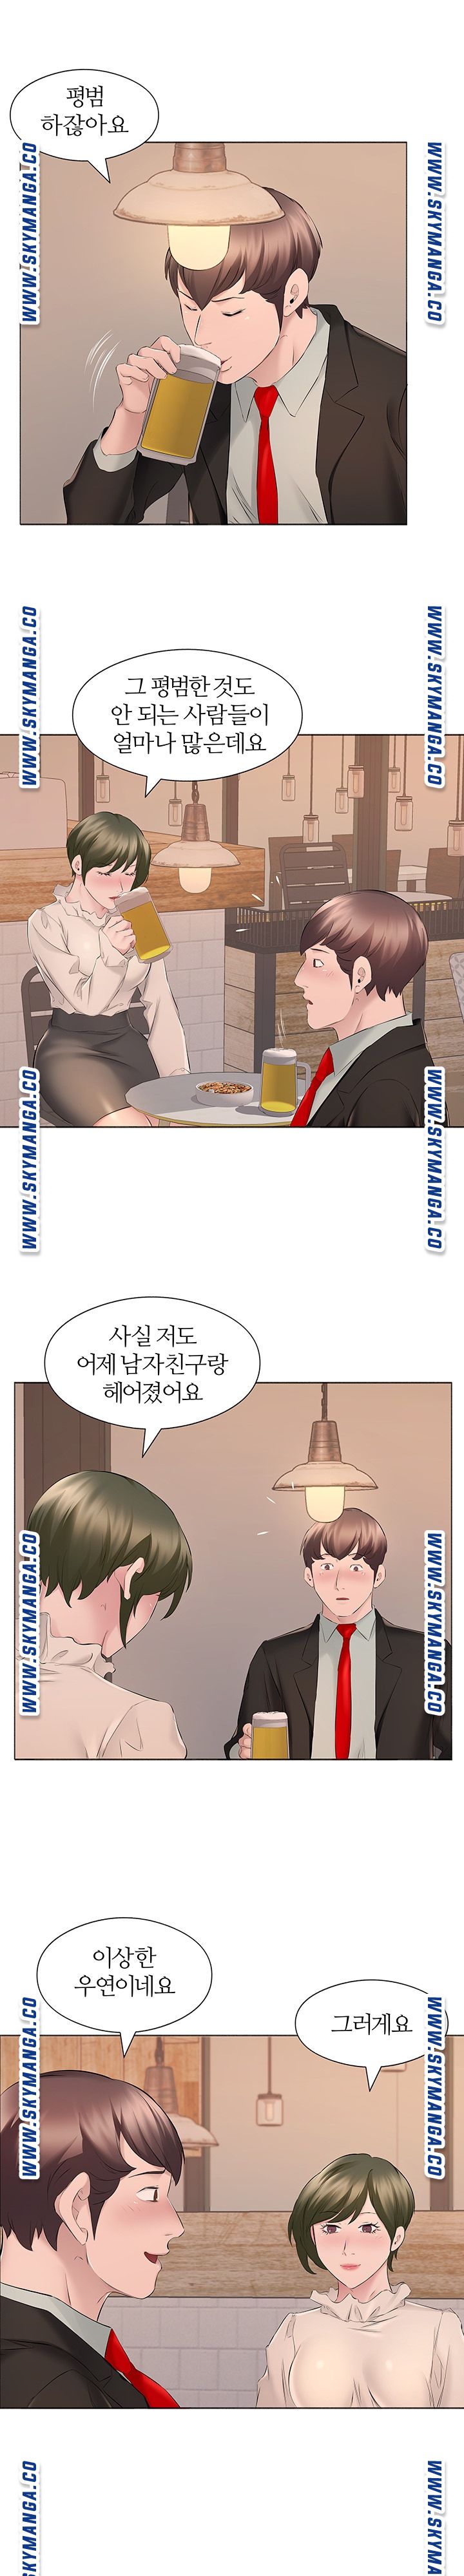 One Room Hotel Raw - Chapter 16 Page 3